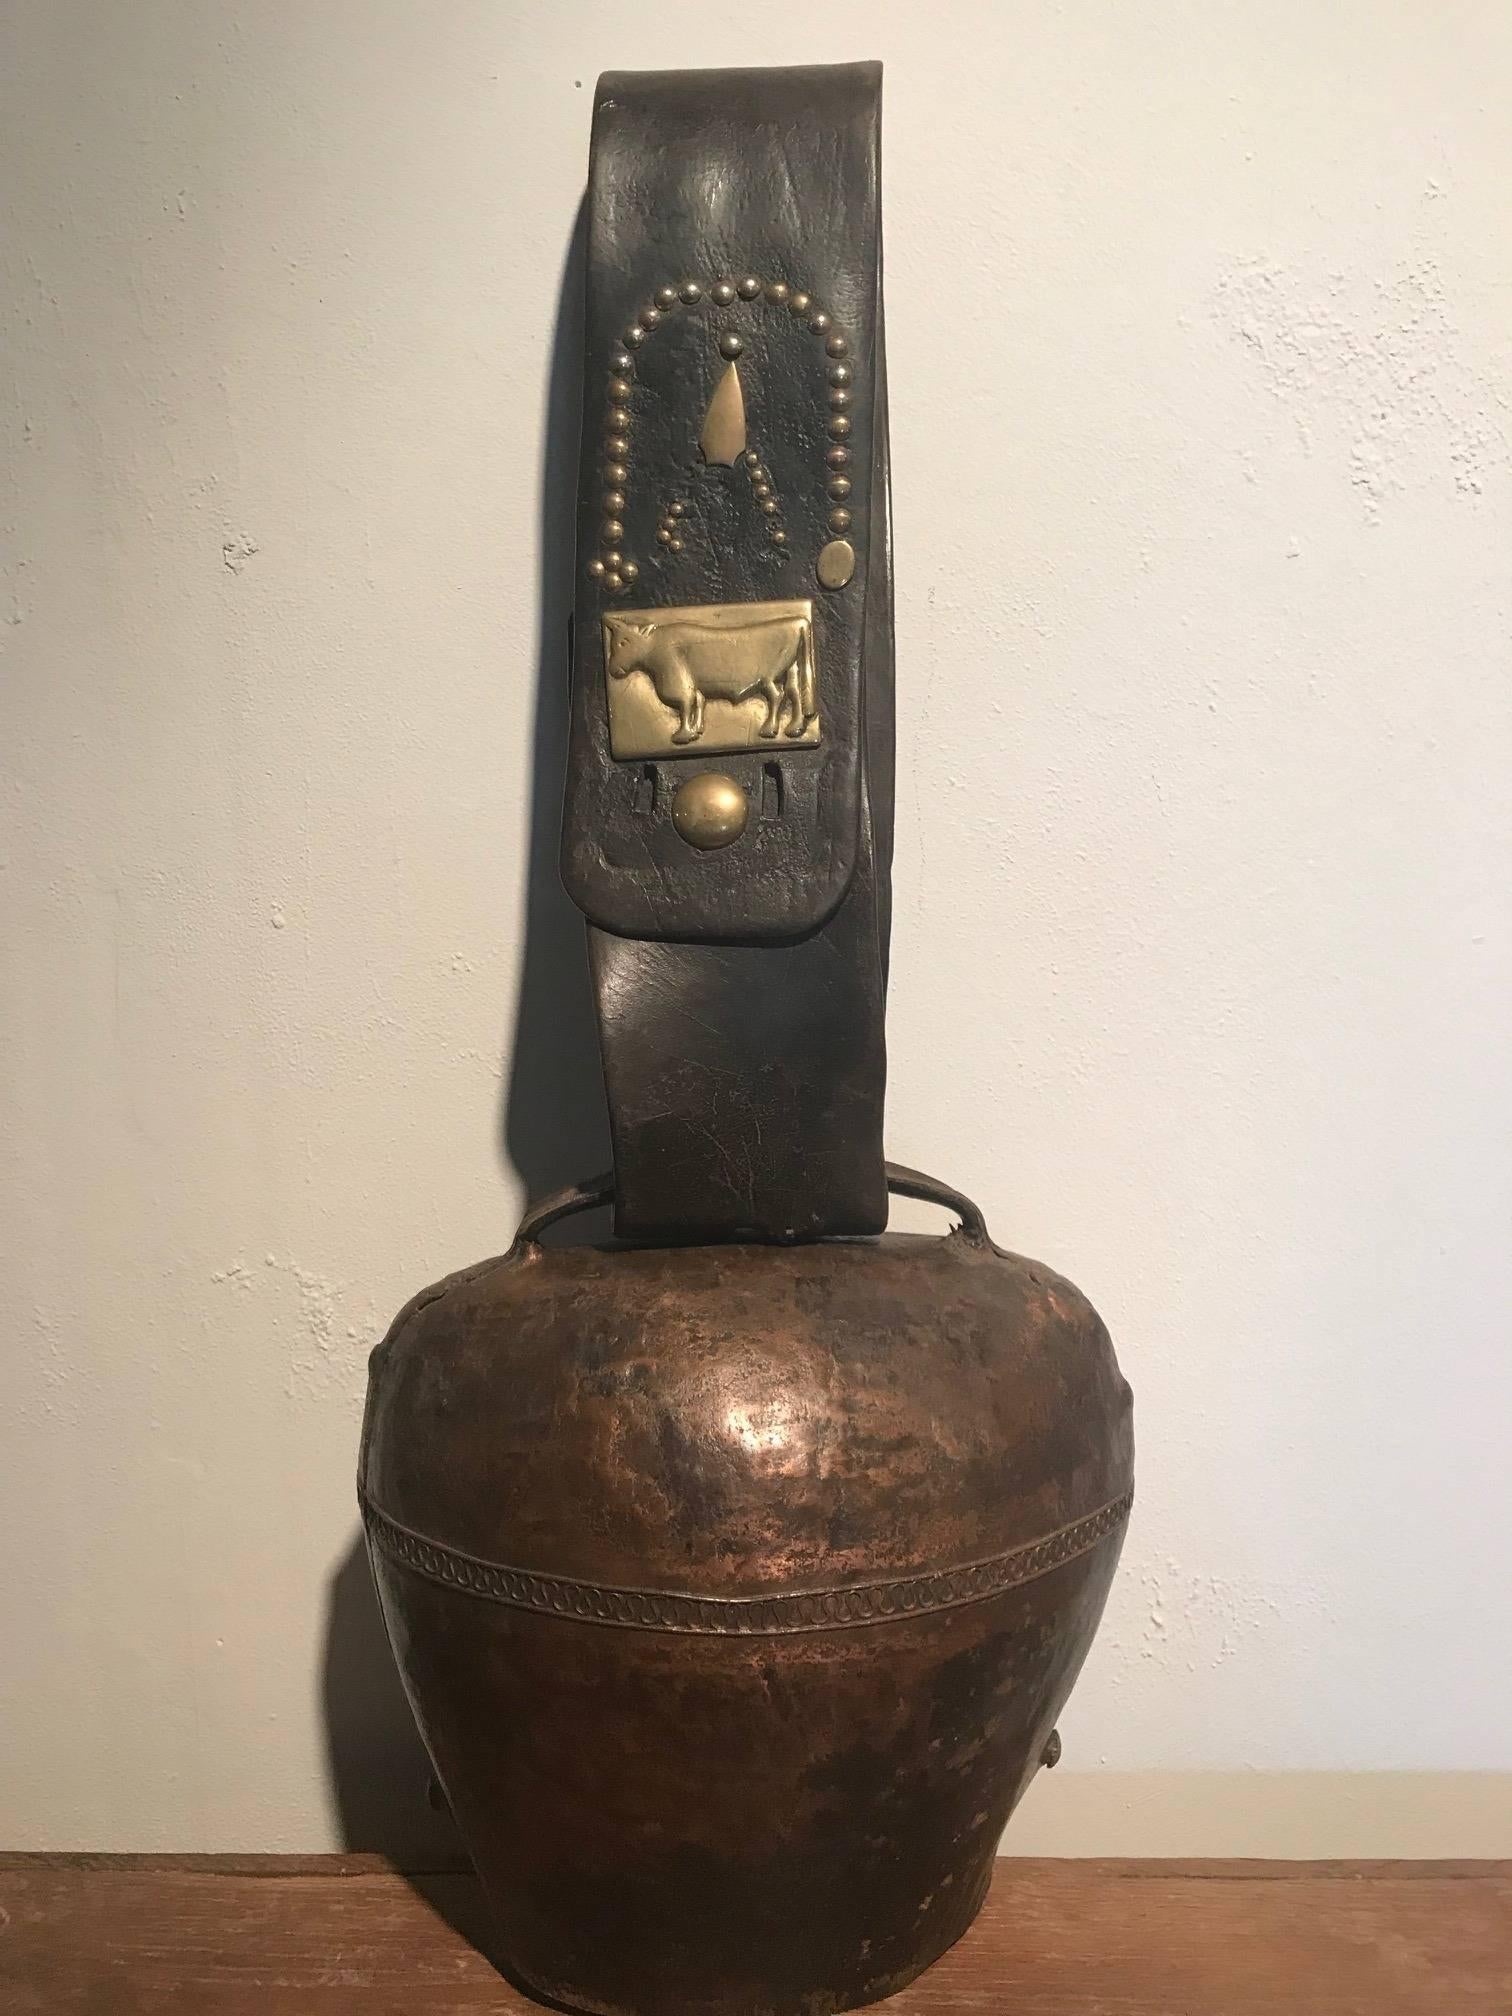 A wonderful later 19th century Toro Bell - Bull Bell from the southwest of France. Wonderfully crafted from patinated metal and a beautifully patina'd leather strap adorned with a handsome brass bull. A terrific decorative piece for a casual living